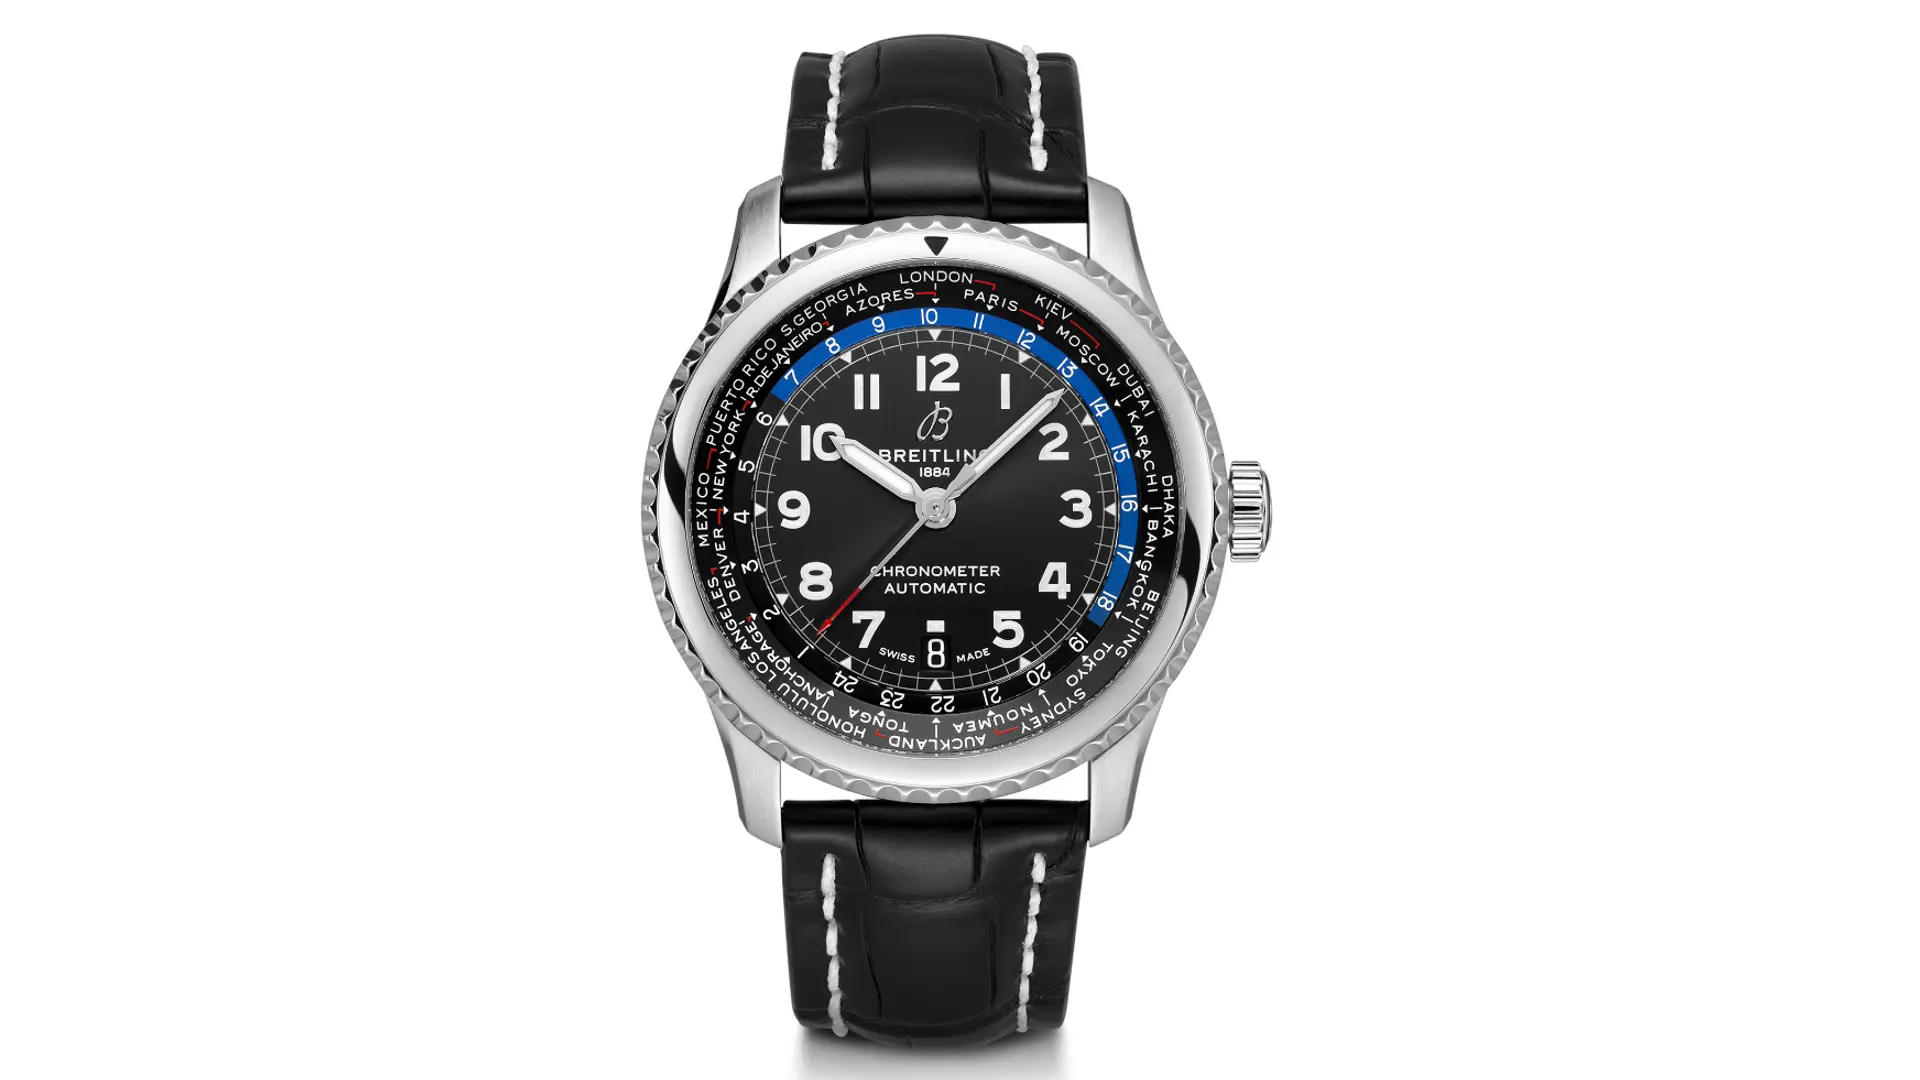 Lifestyle Articles - Ten of the Best Travel Watches - 2